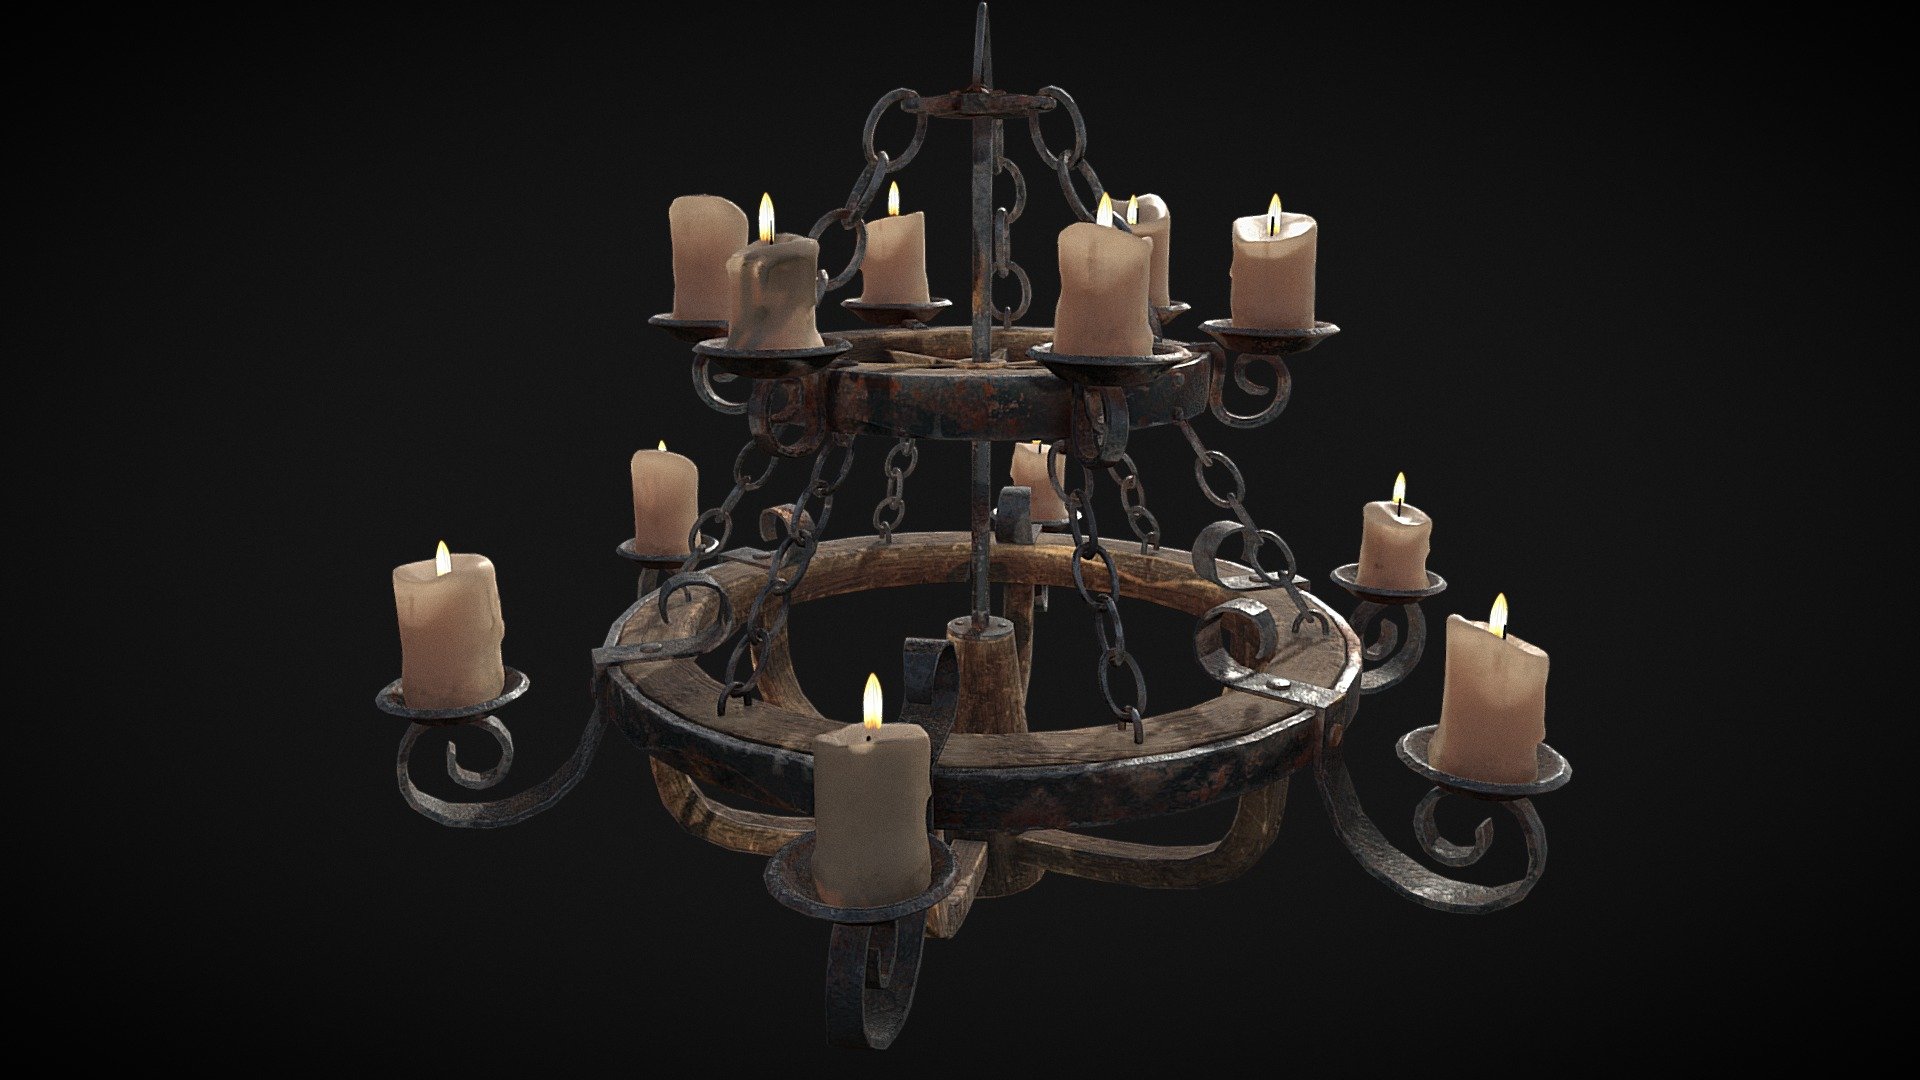 Rustic Medieval Wooden Candle Chandelier
VR / AR / Low-poly
PBR approved
Geometry Polygon mesh
Polygons 25,643
Vertices 26,061
Textures 4K - Rustic Medieval Wooden Candle Chandelier - Buy Royalty Free 3D model by GetDeadEntertainment 3d model